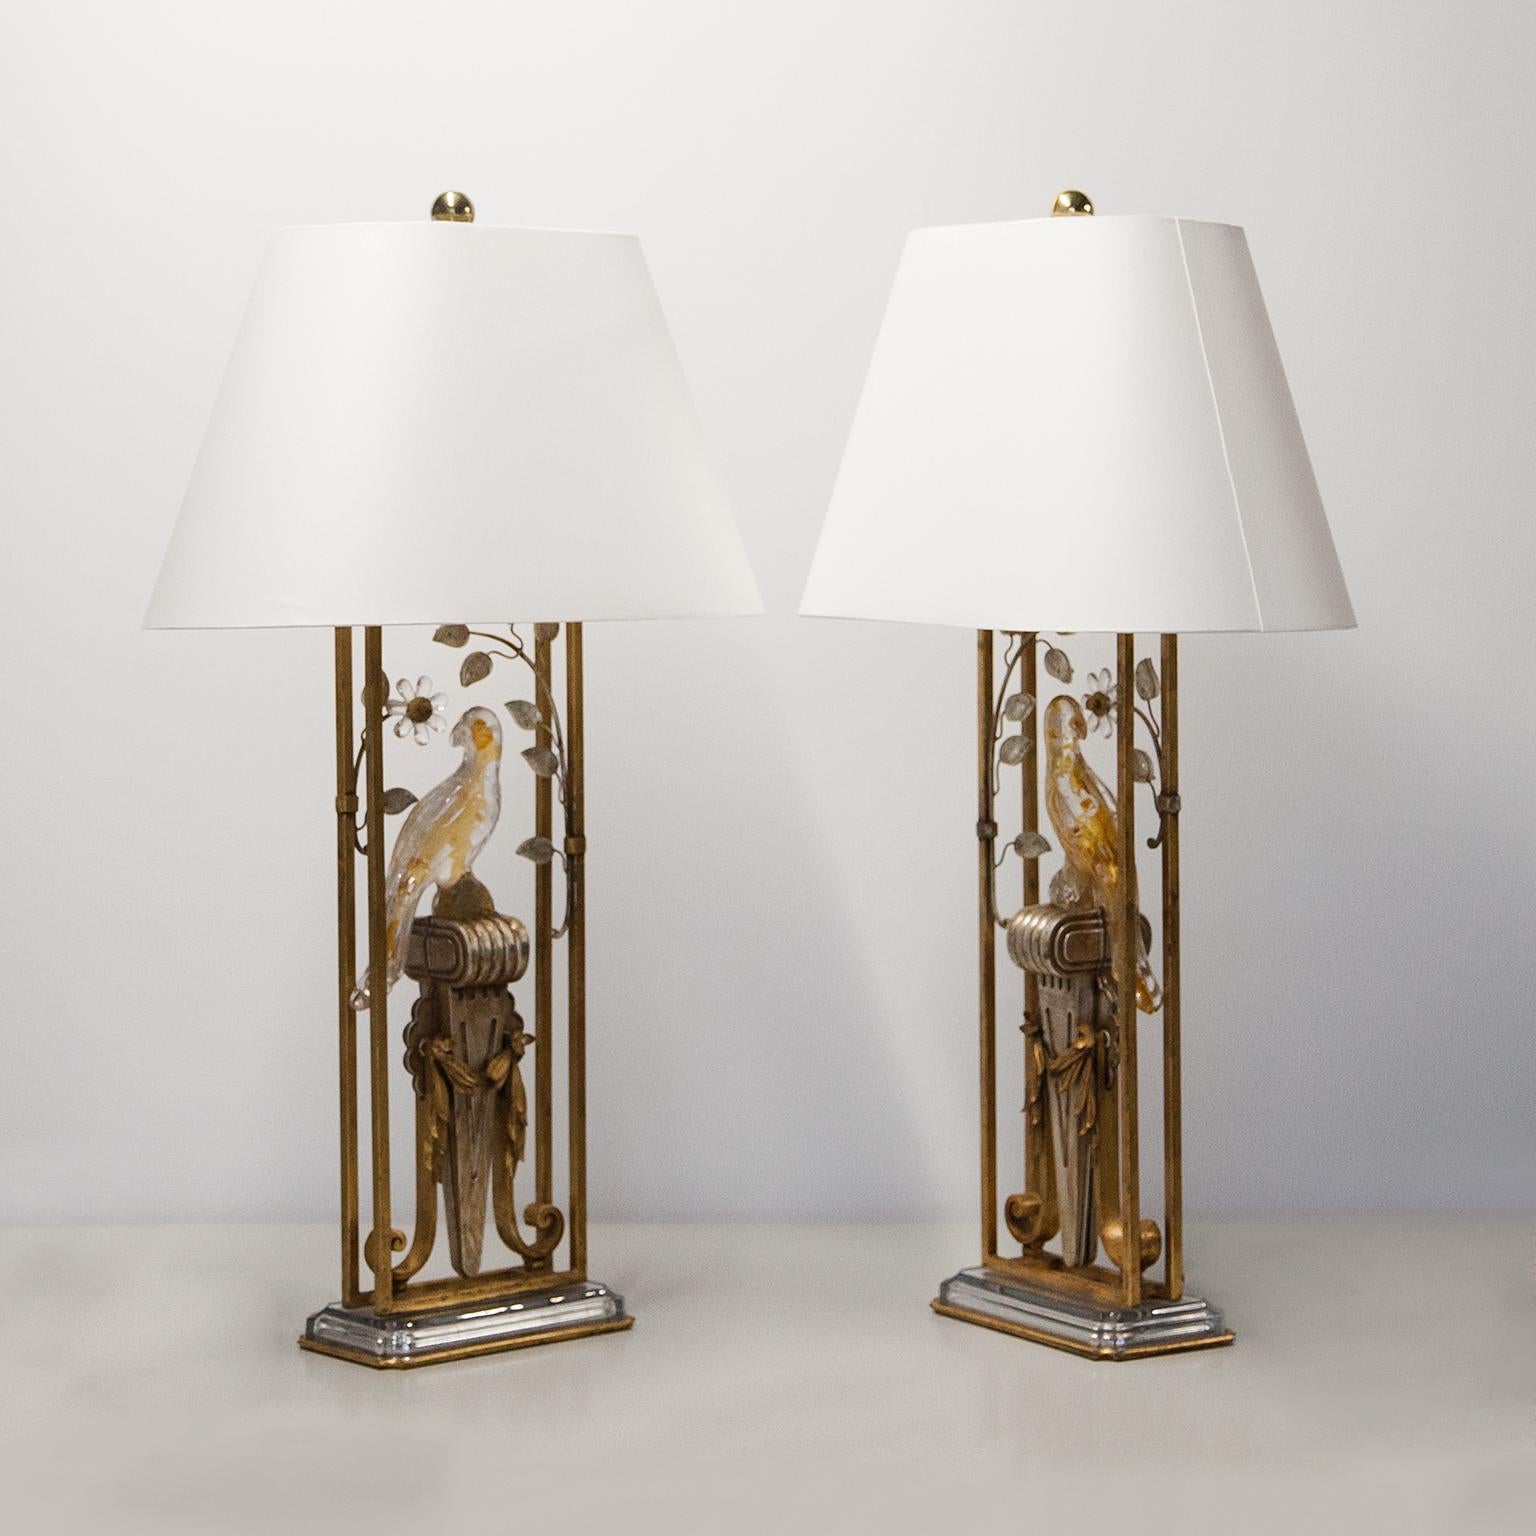 Wonderful classic design by Banci with abstract blossoms and tendrils made of gold-coloured metal and crystal glass, each wired for two E 27 bulbs.
Very good original condition with two new white paper shades. Excellent vintage condition. All our